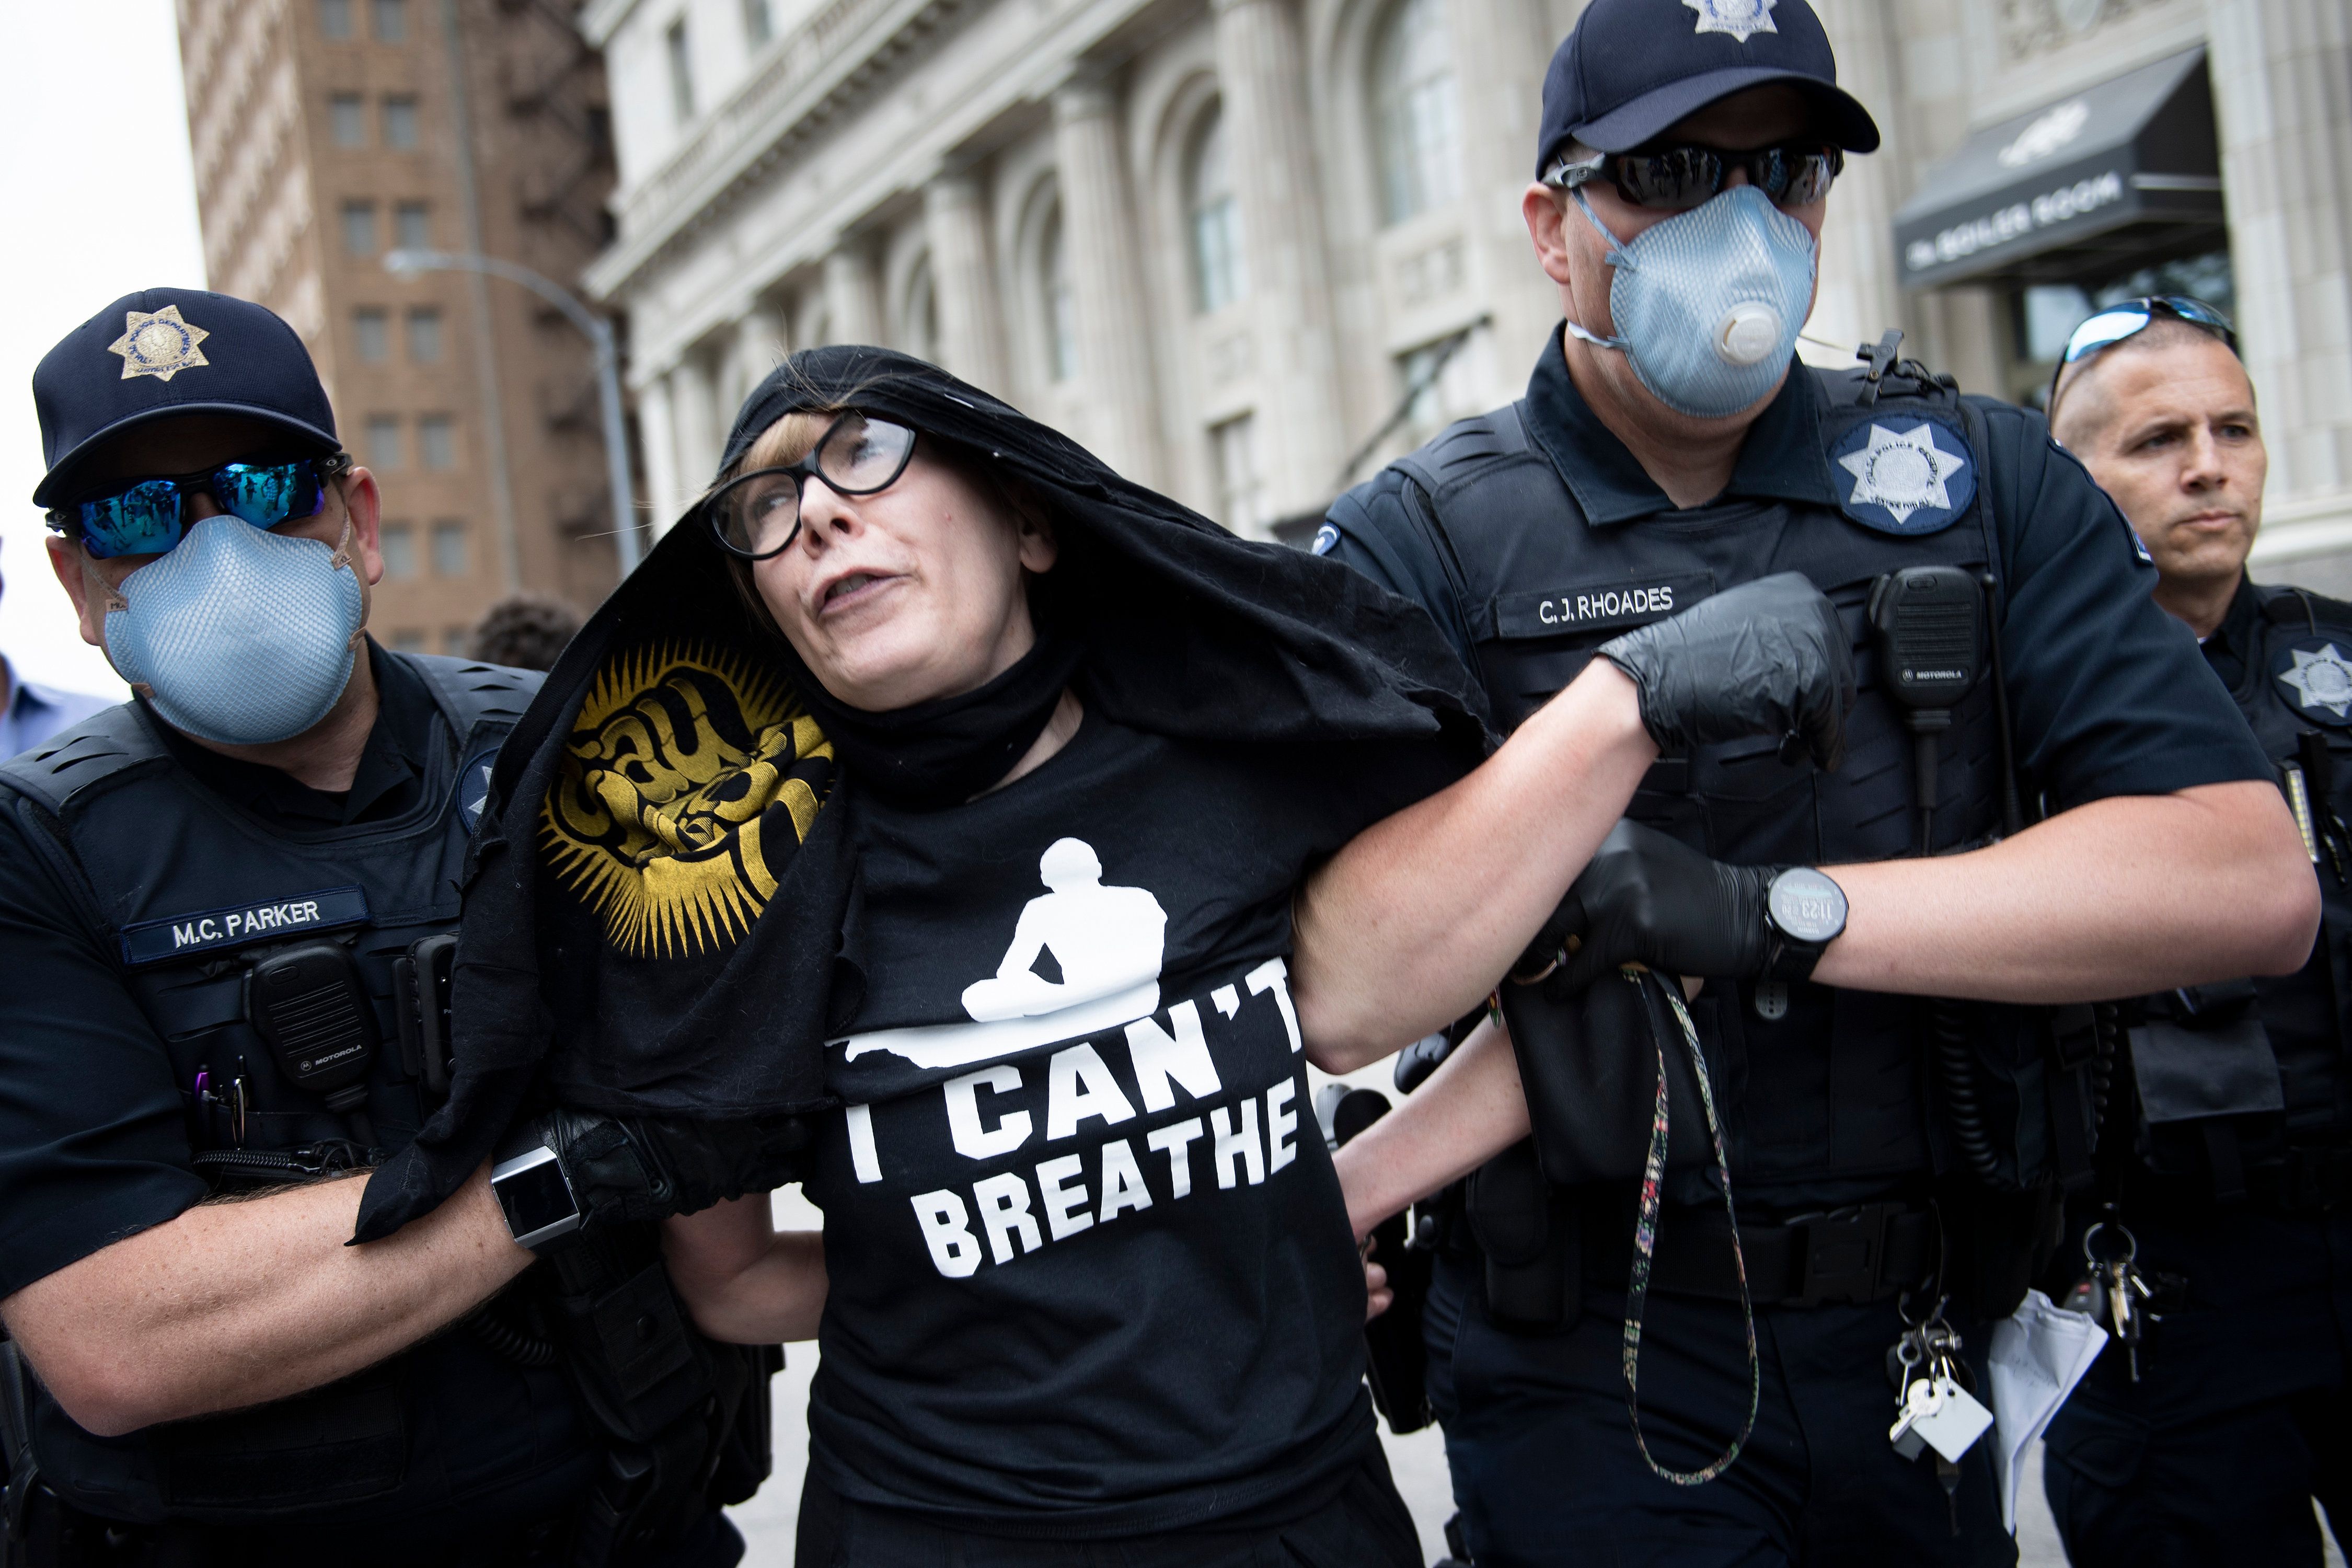 A woman wearing an "I can't breathe" shirt is carried by police wearing face masks